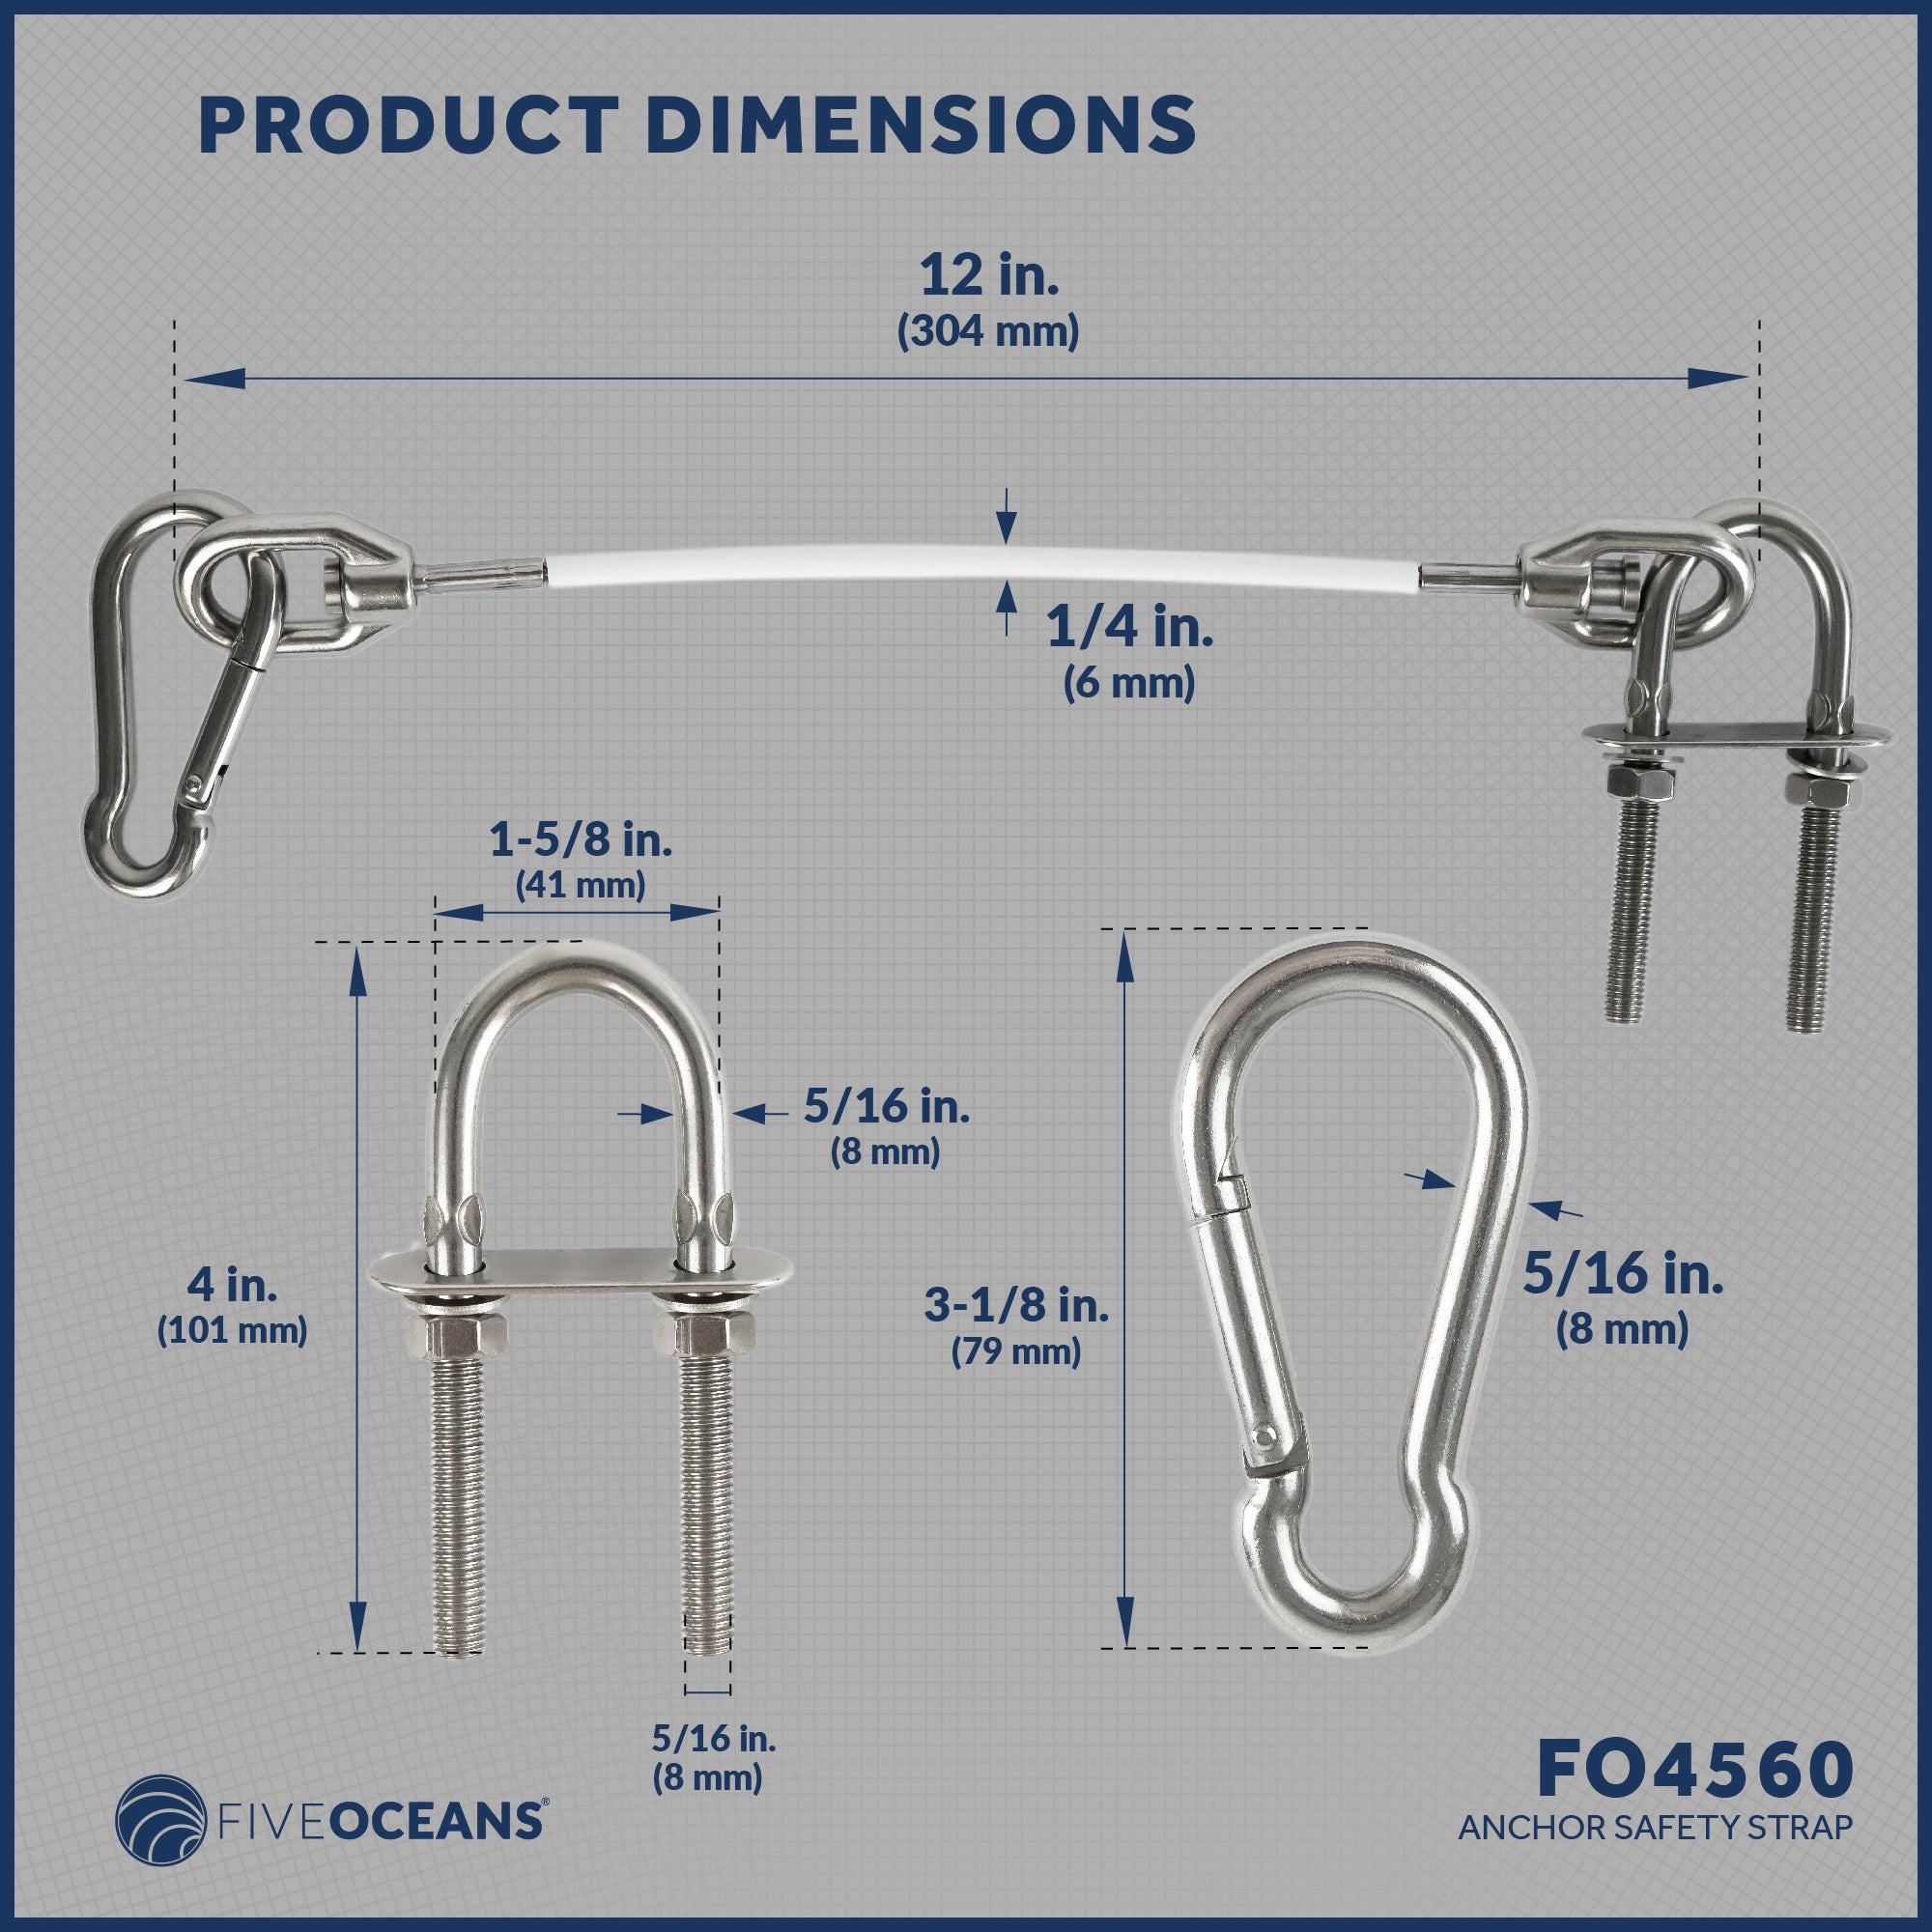 Anchor Safety Strap, Snap Hook Carabiner and 5/16" U-Bolt - FO4560